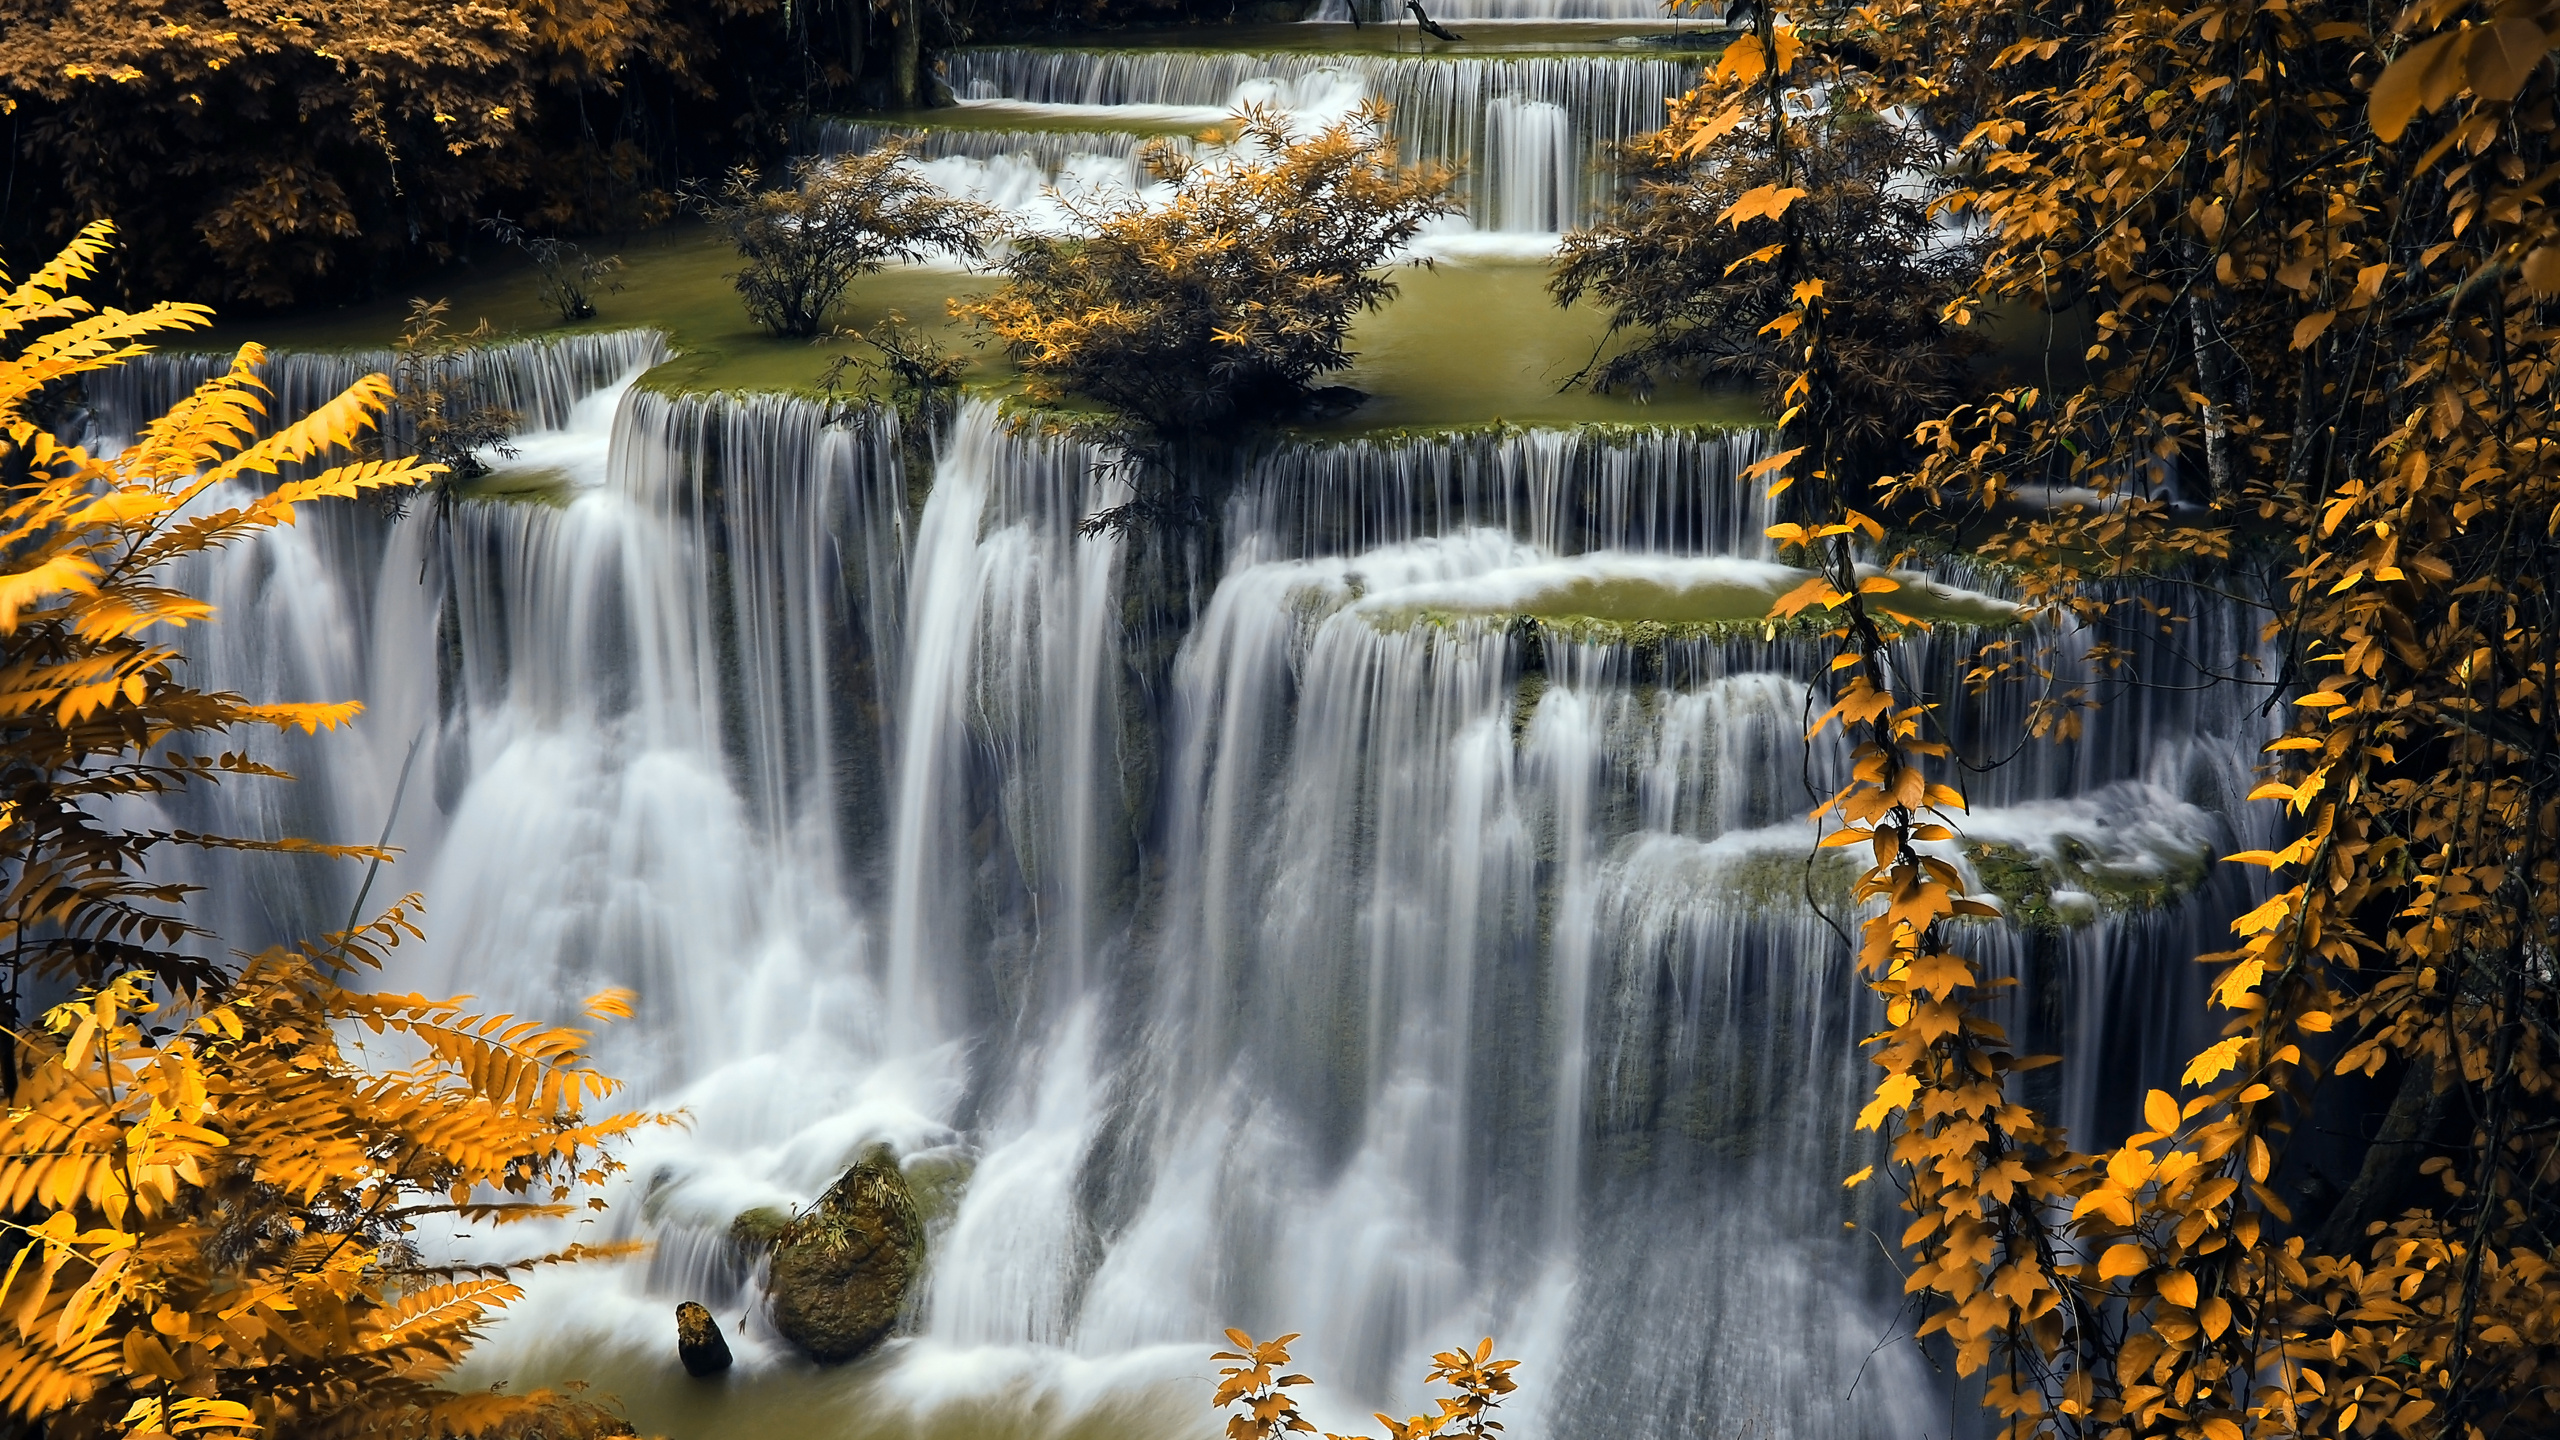 Water Falls in The Middle of The Forest. Wallpaper in 2560x1440 Resolution